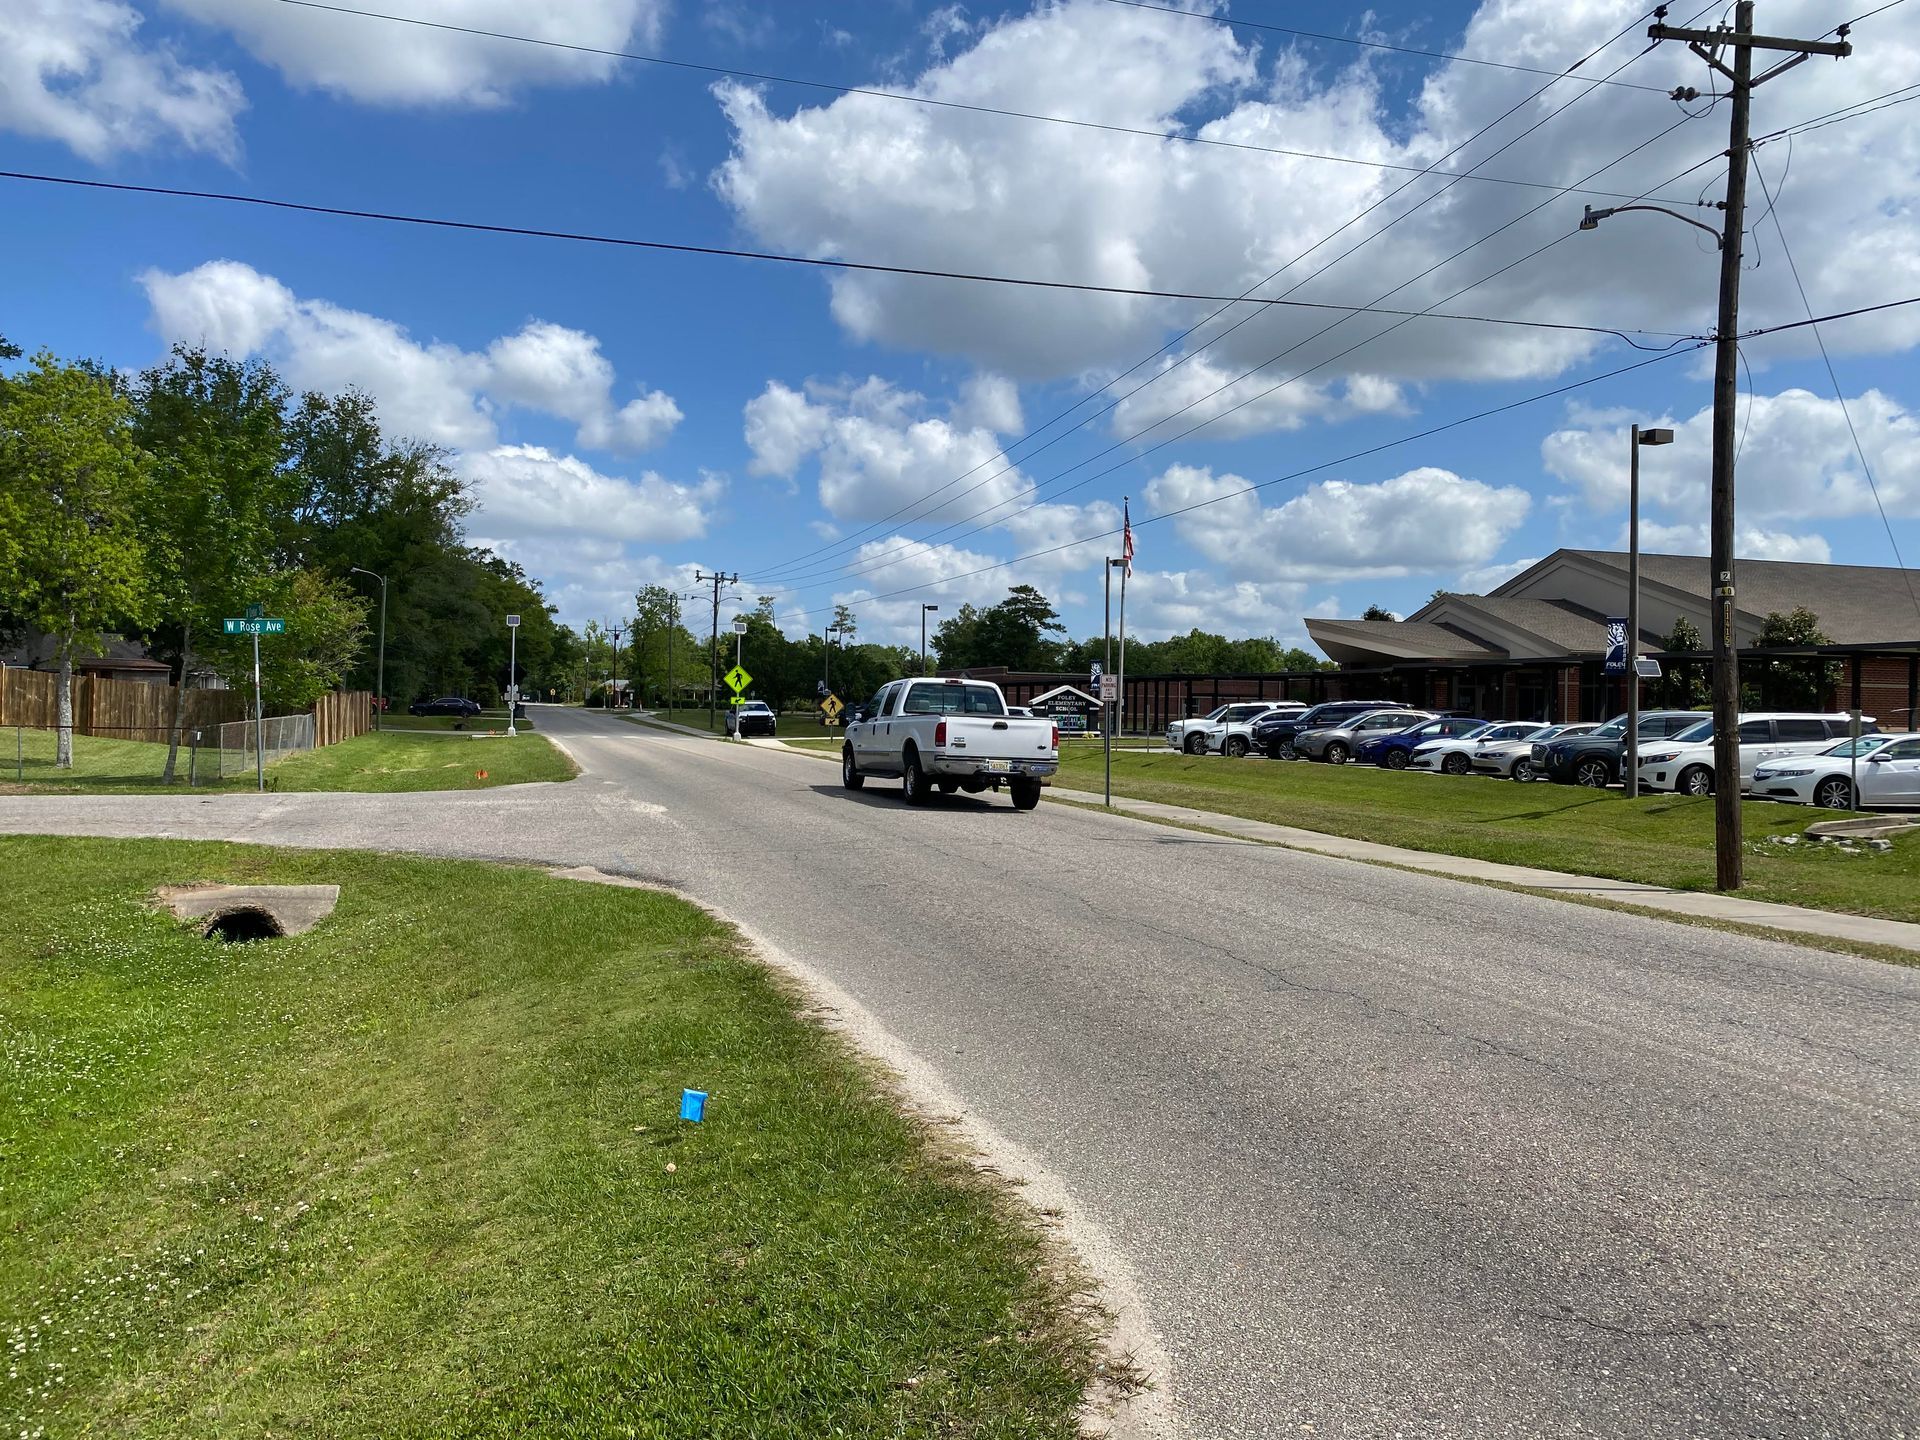 Foley Approves 4 New Sidewalk Projects Around the City